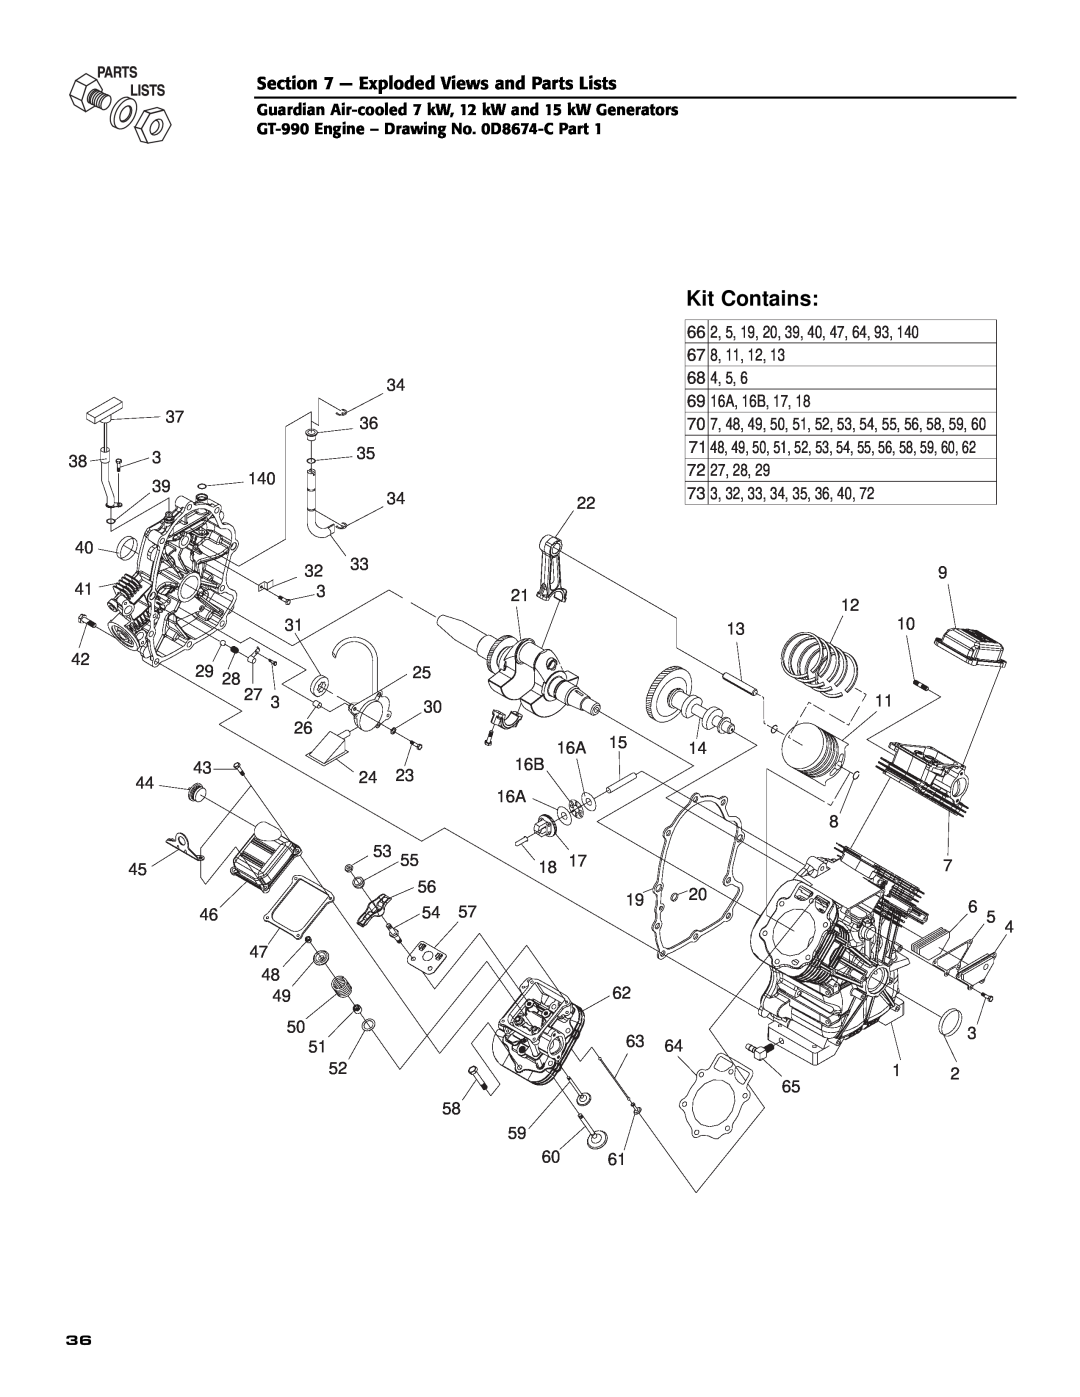 Generac Power Systems 04760-0 Kit Contains, Exploded Views and Parts Lists, 66 2, 5, 19, 20, 39, 40, 47, 64, 93 67 8, 1310 